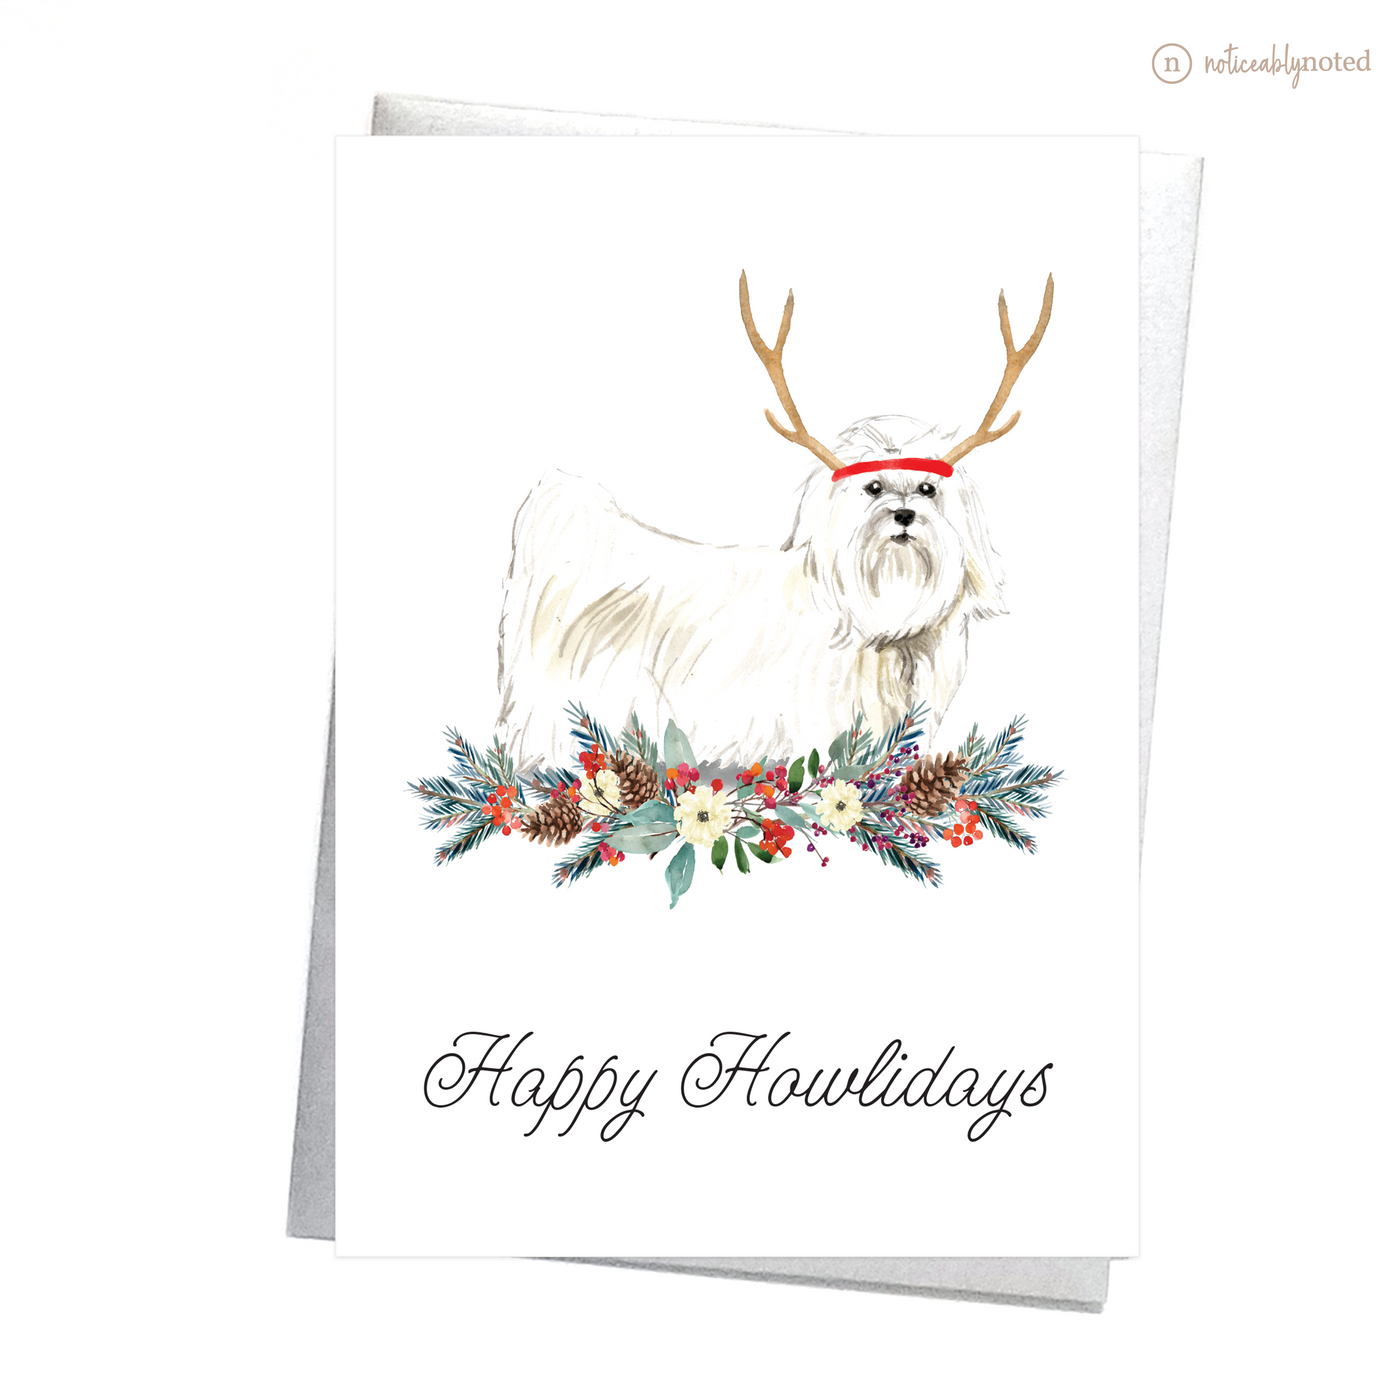 Maltese Dog Christmas Card | Noticeably Noted